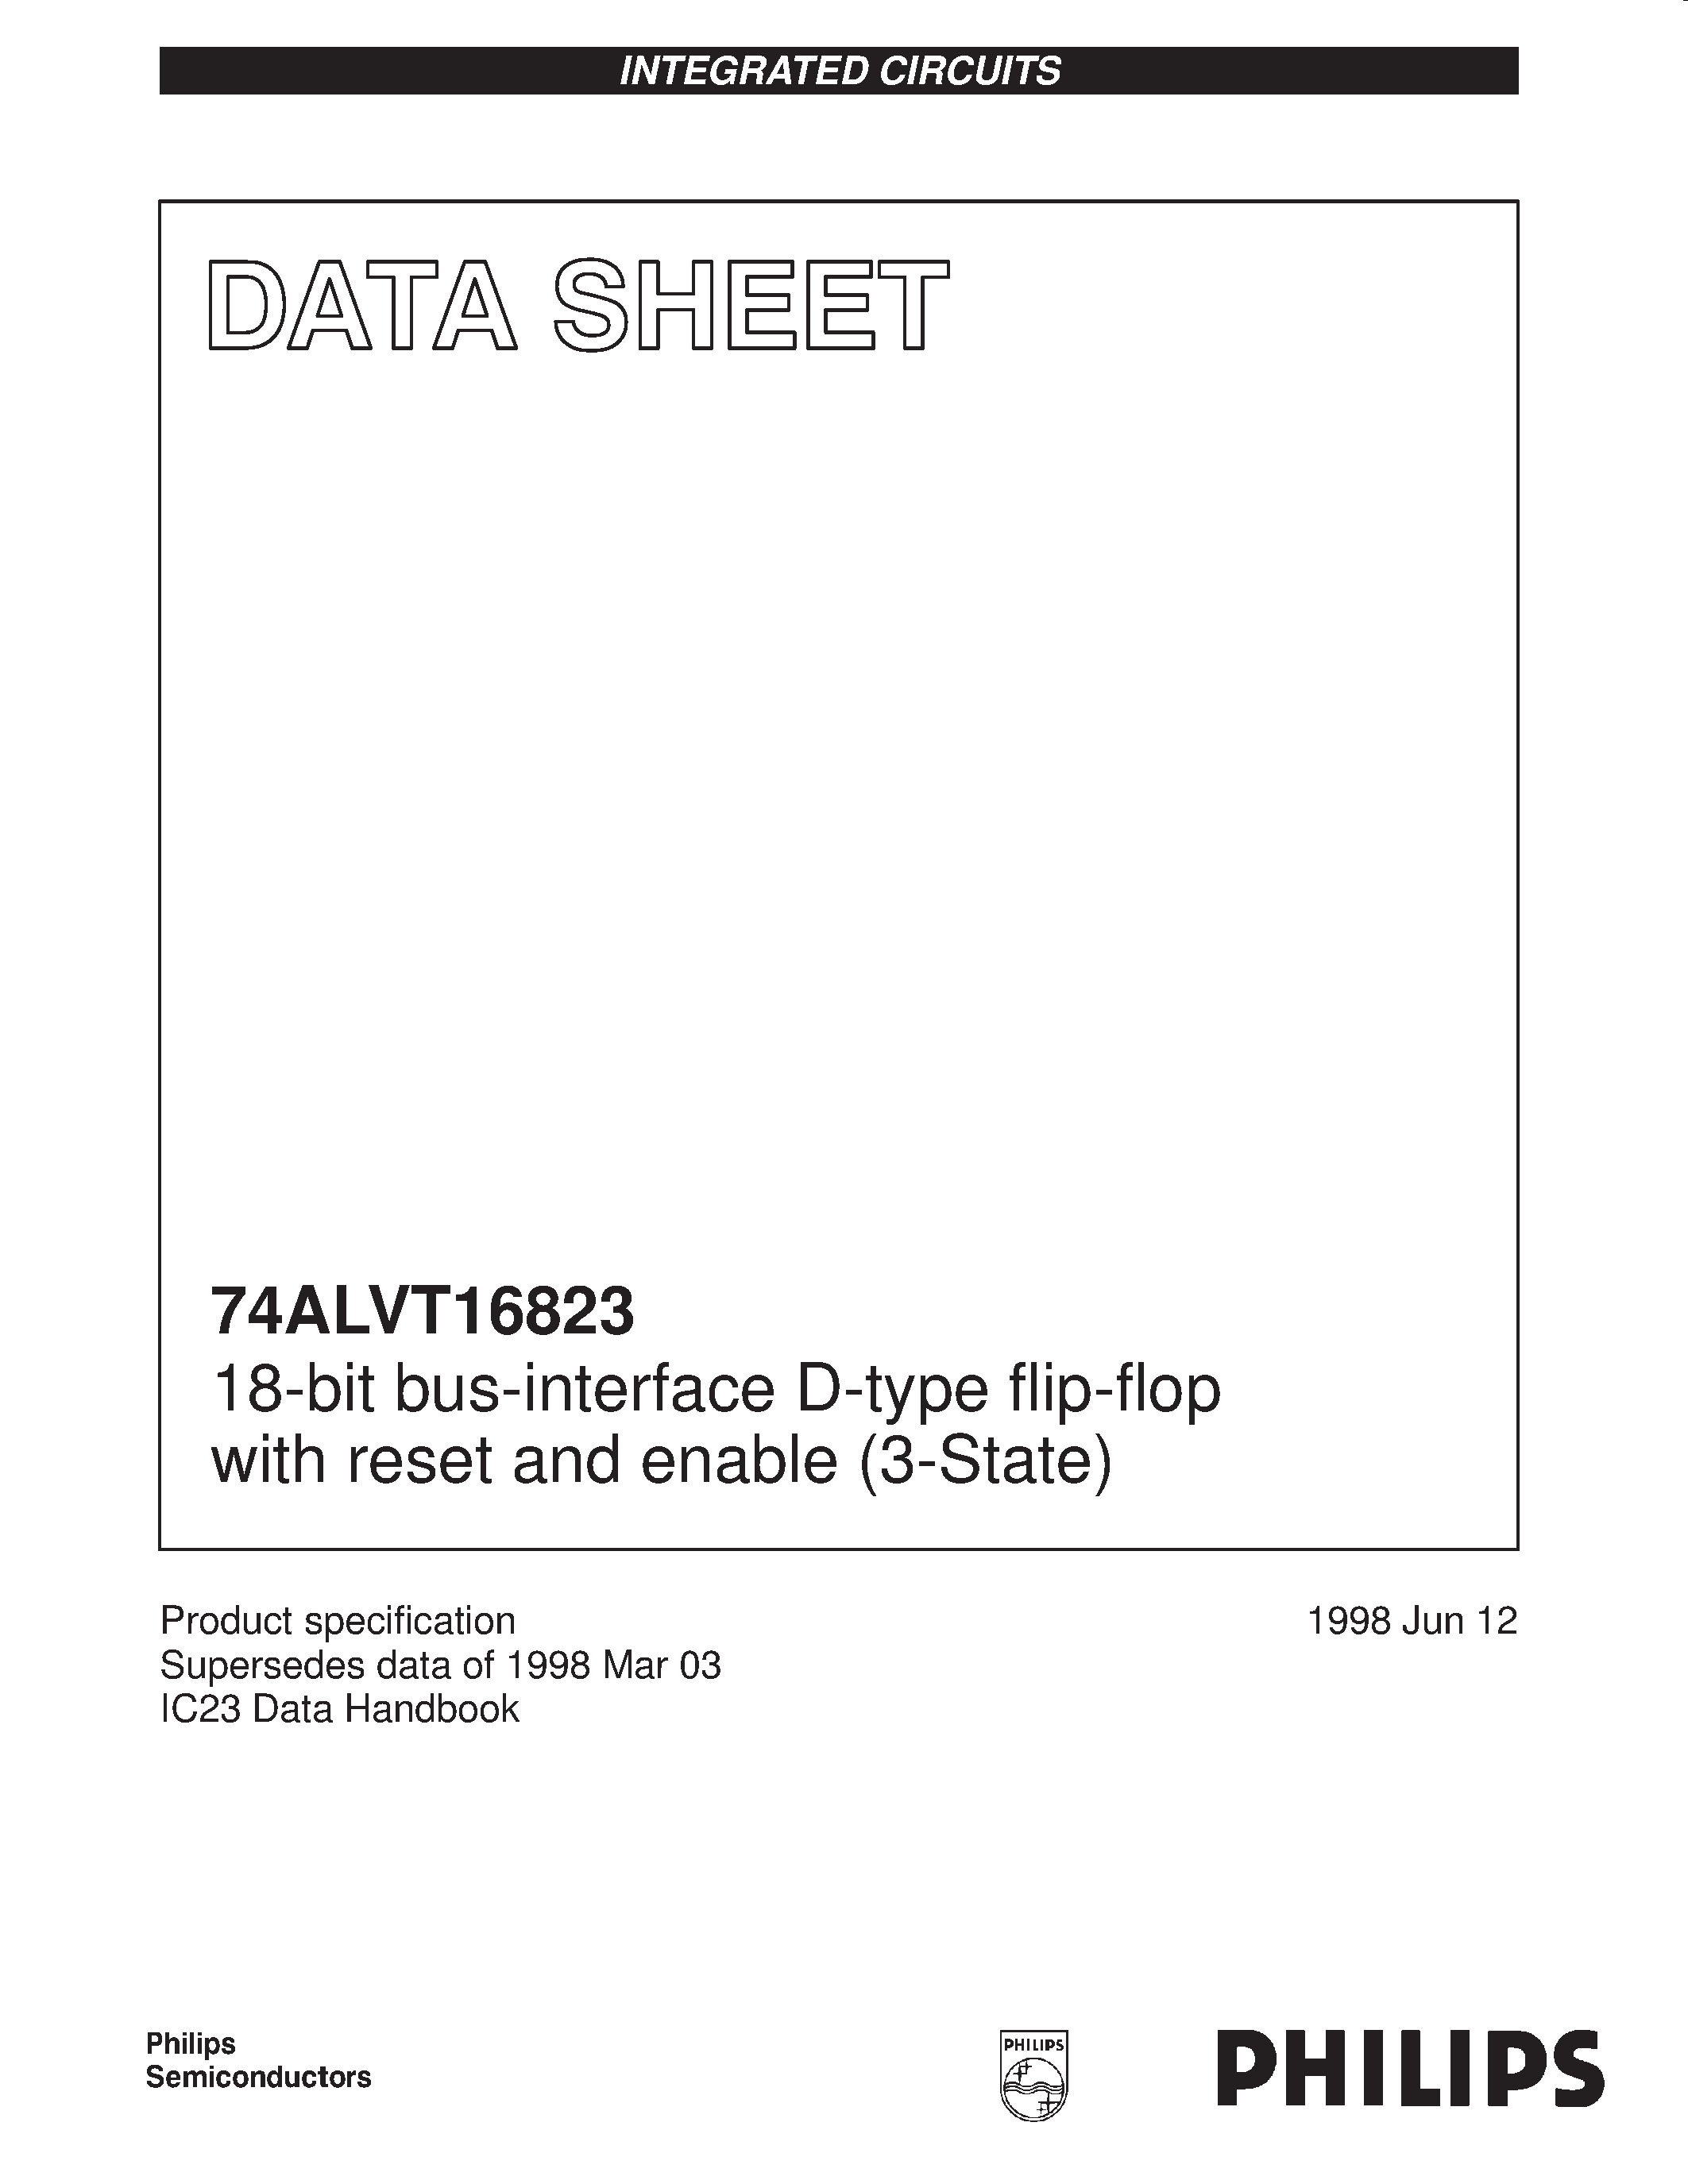 Datasheet 74ALVT16823DGG - 18-bit bus-interface D-type flip-flop with reset and enable 3-State page 1